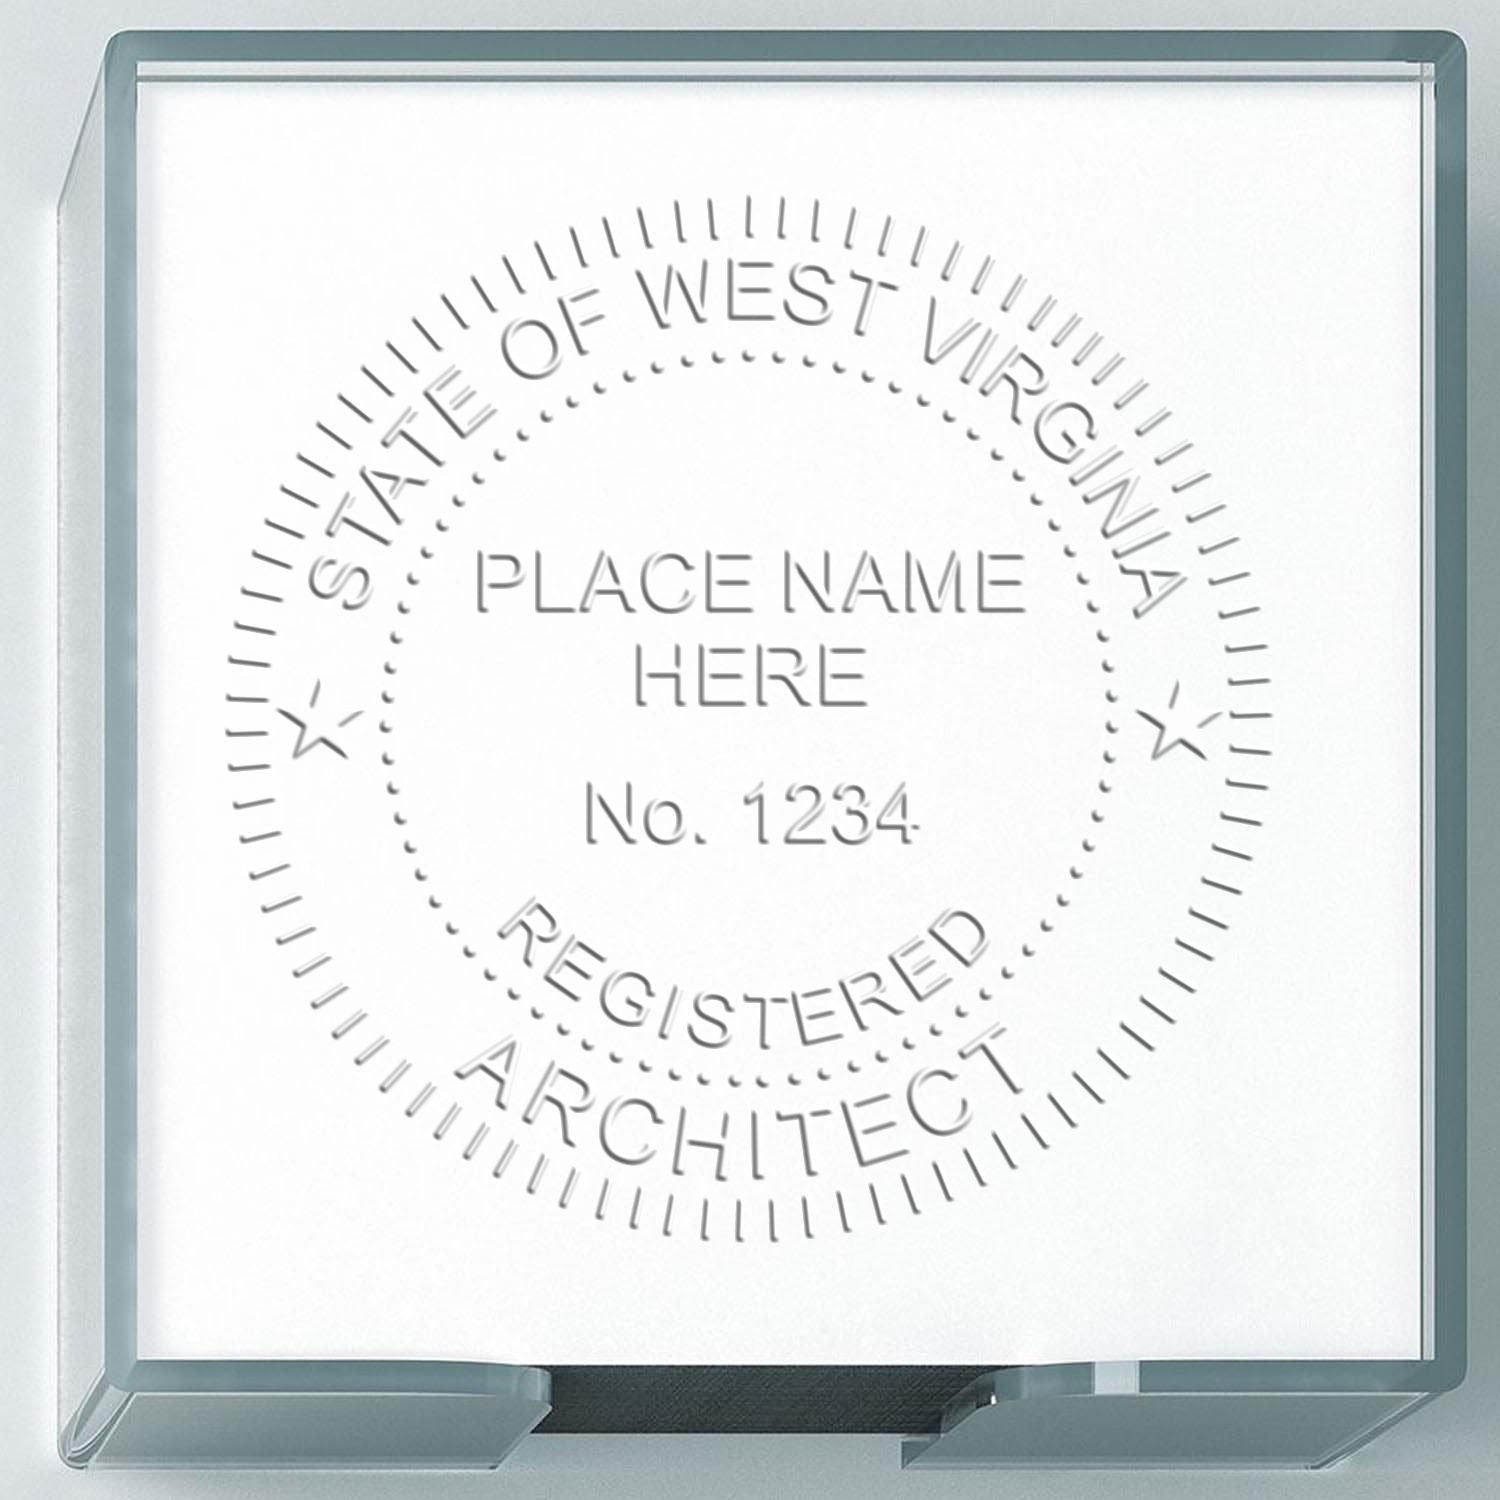 The main image for the Handheld West Virginia Architect Seal Embosser depicting a sample of the imprint and electronic files